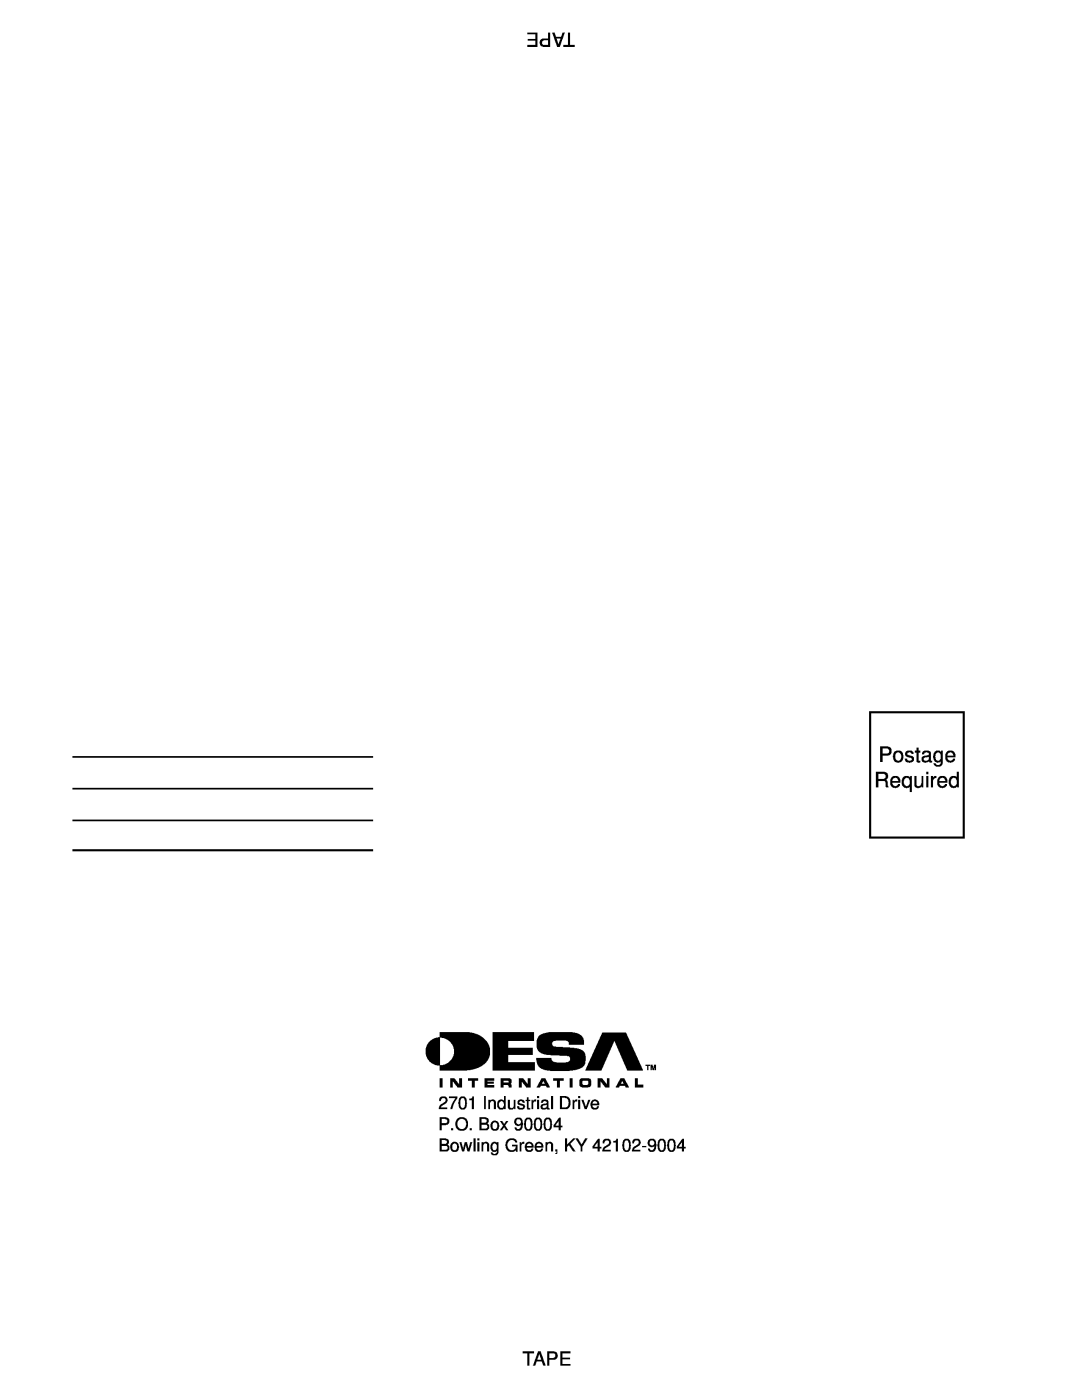 Desa 200 owner manual Postage Required, Tape, Industrial Drive P.O. Box Bowling Green, KY 